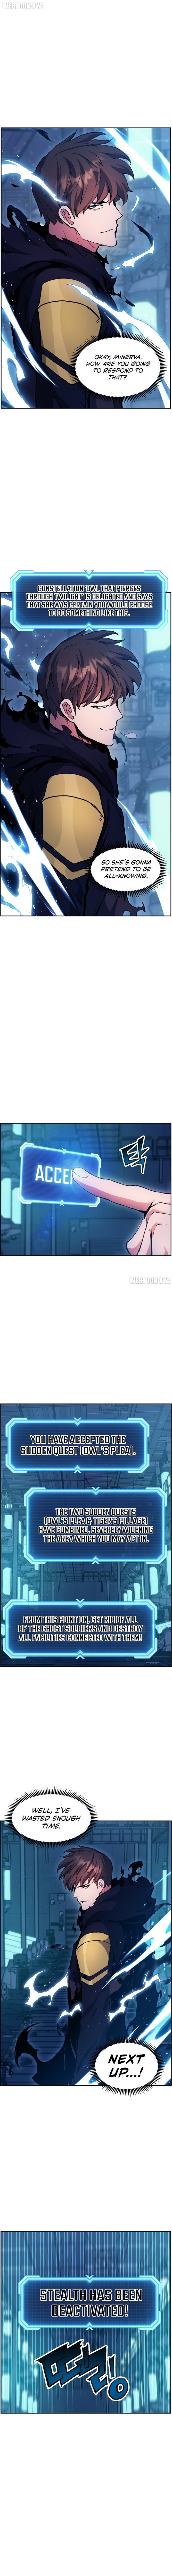 return-of-the-shattered-constellation-chap-46-3